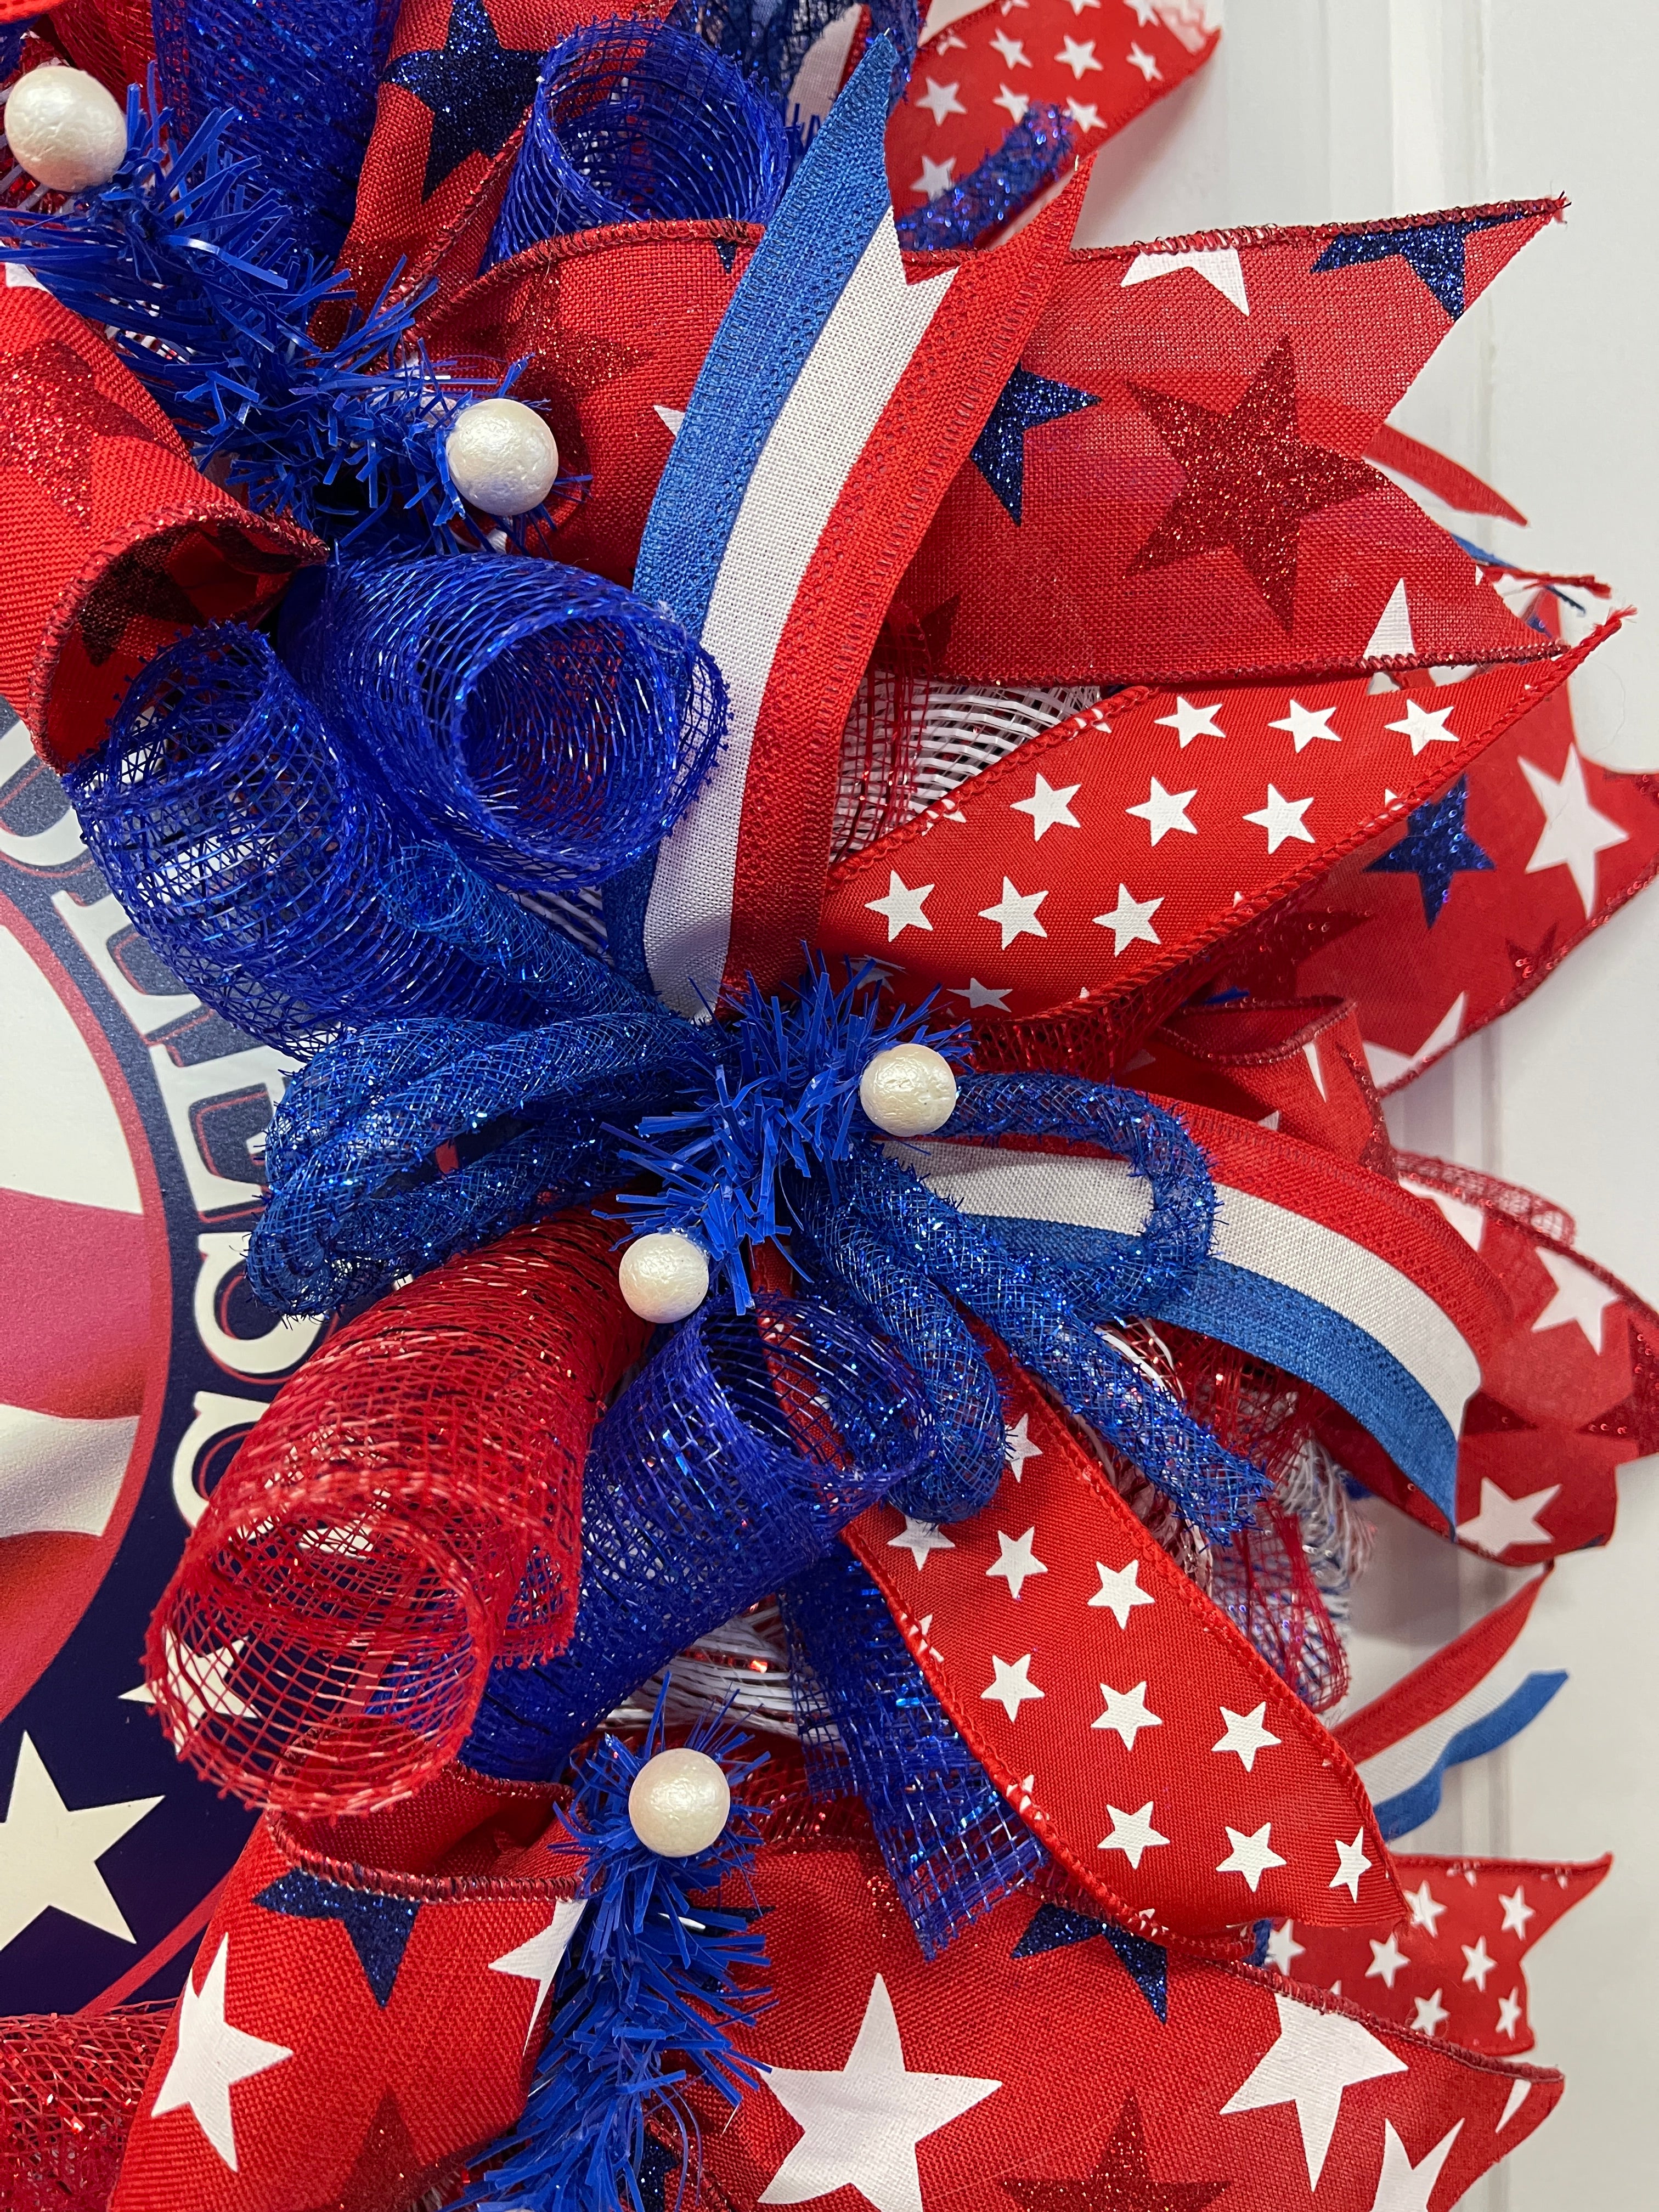 Close Up Detail of Blue Tinsel Tubing, White Balls and Ribbon tails with red, white and blue stripes and white stars on red ribbon